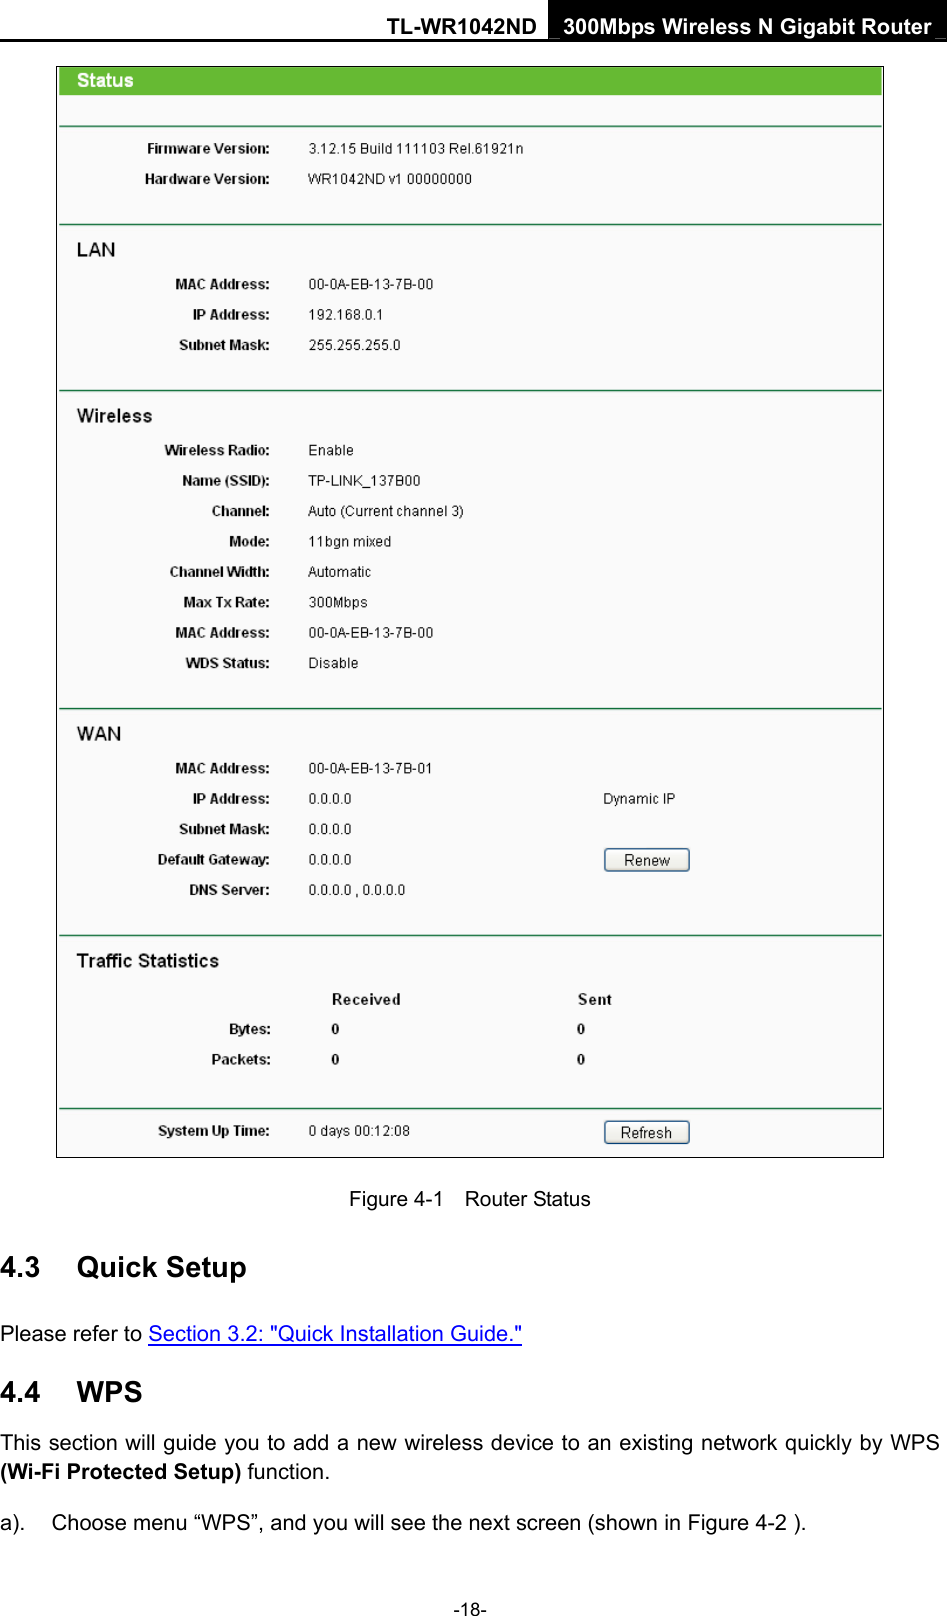 TL-WR1042ND 300Mbps Wireless N Gigabit Router -18-  Figure 4-1    Router Status 4.3  Quick Setup Please refer to Section 3.2: &quot;Quick Installation Guide.&quot; 4.4  WPS This section will guide you to add a new wireless device to an existing network quickly by WPS (Wi-Fi Protected Setup) function.   a).  Choose menu “WPS”, and you will see the next screen (shown in Figure 4-2 ).   